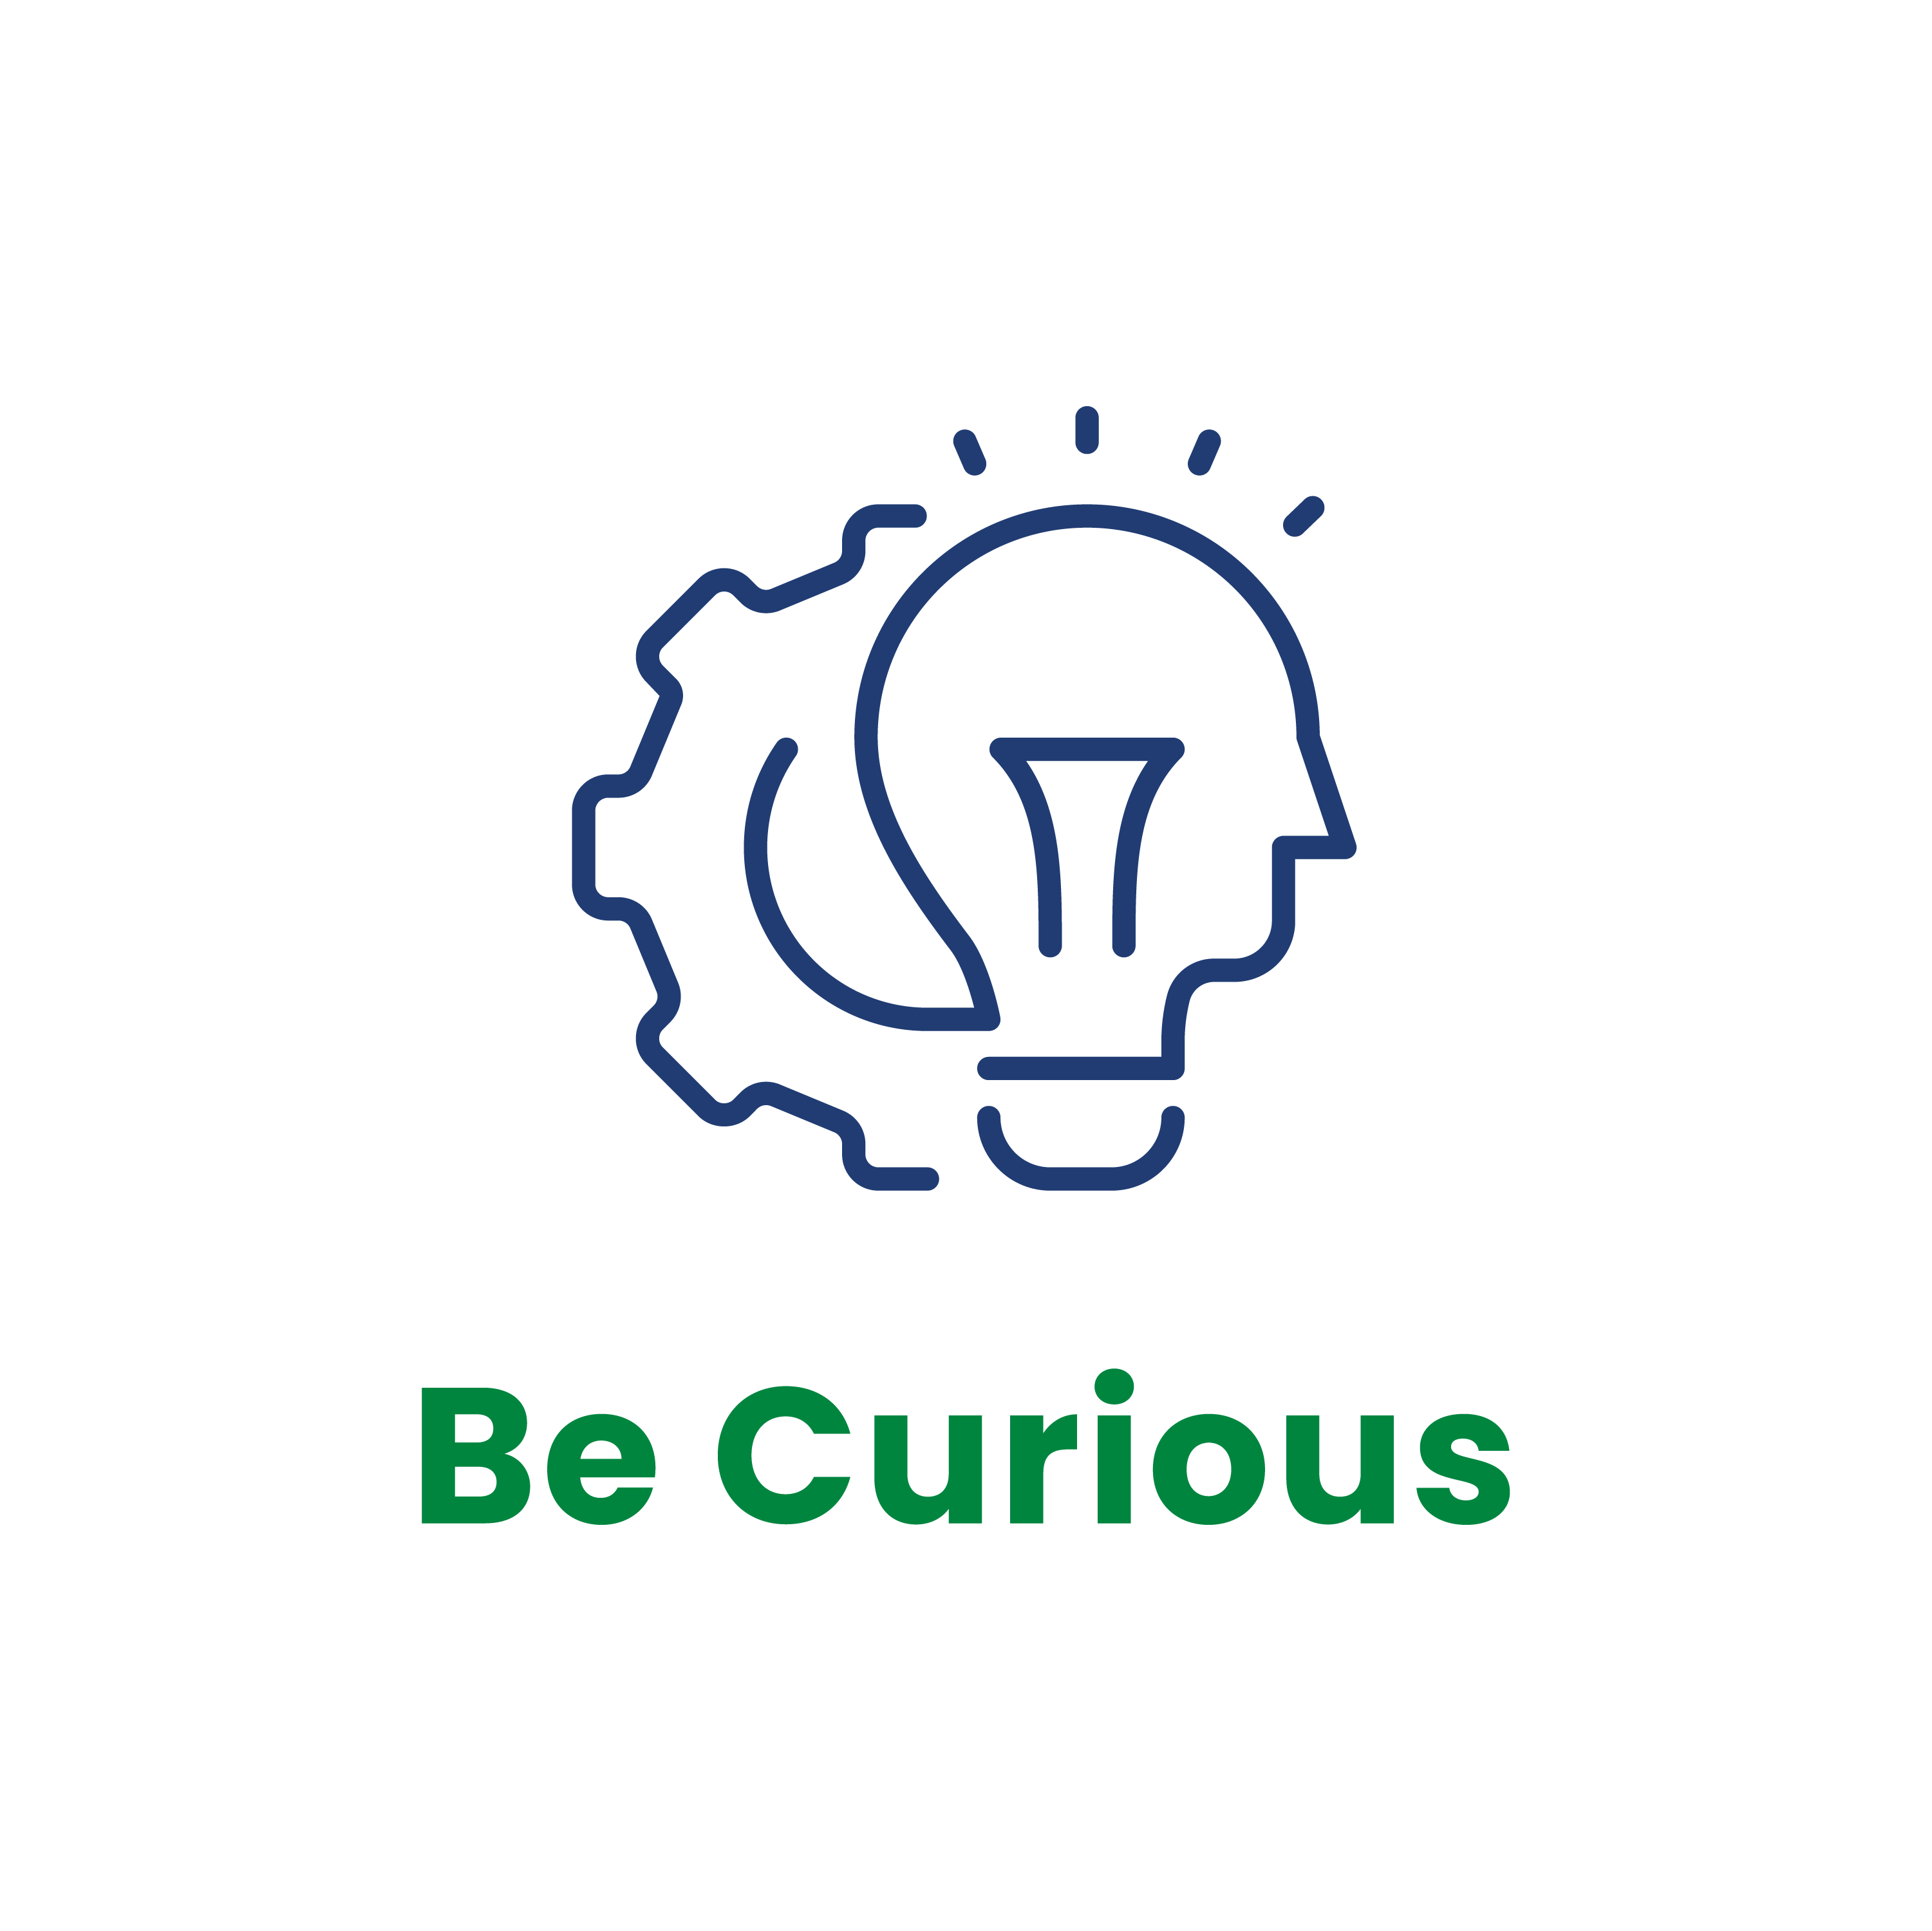 Lightbulb and Gear with "Be Curious" underneath